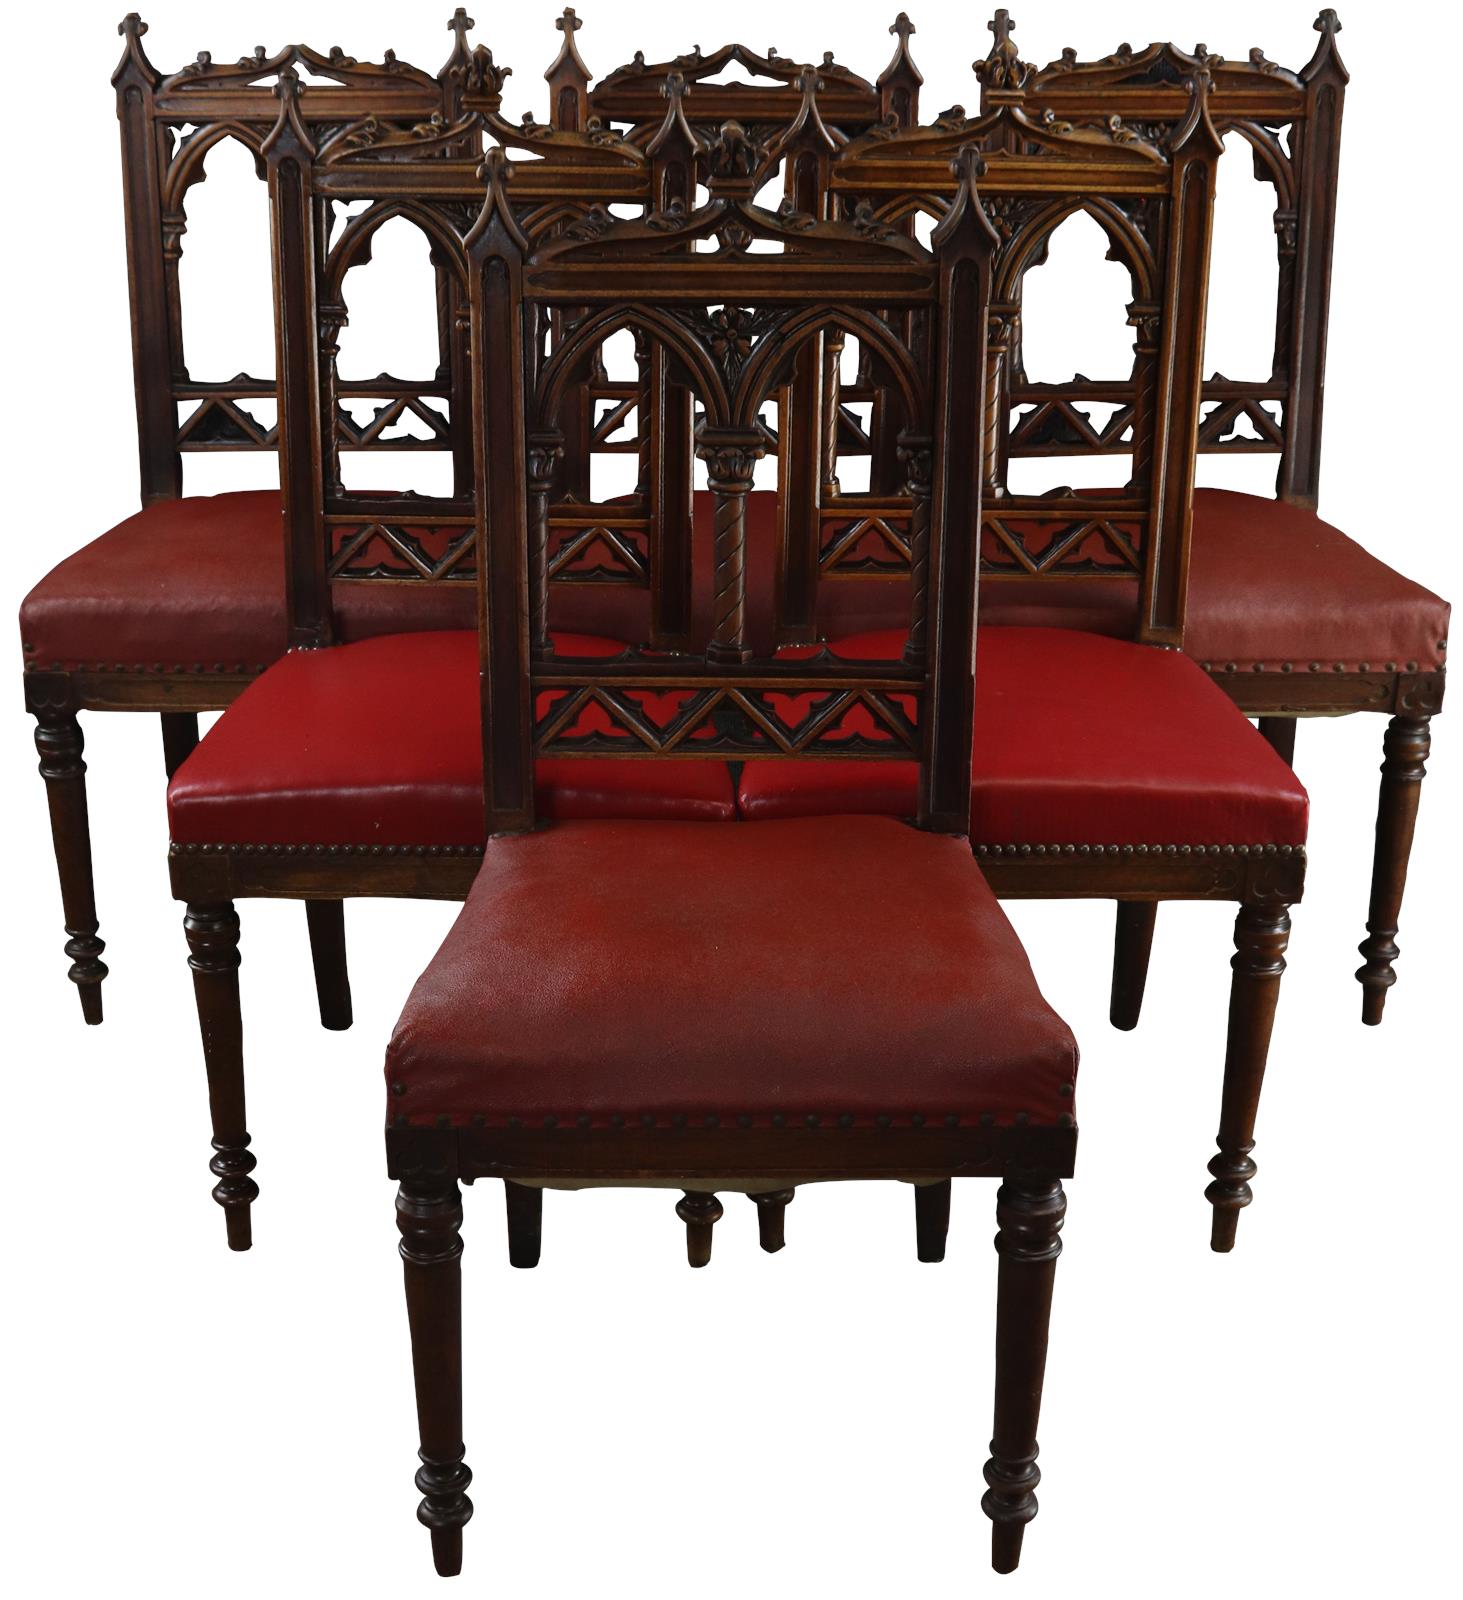 Antique Dining Chairs French Gothic Set 6 Walnut Wood Red Upholstery -Image 1